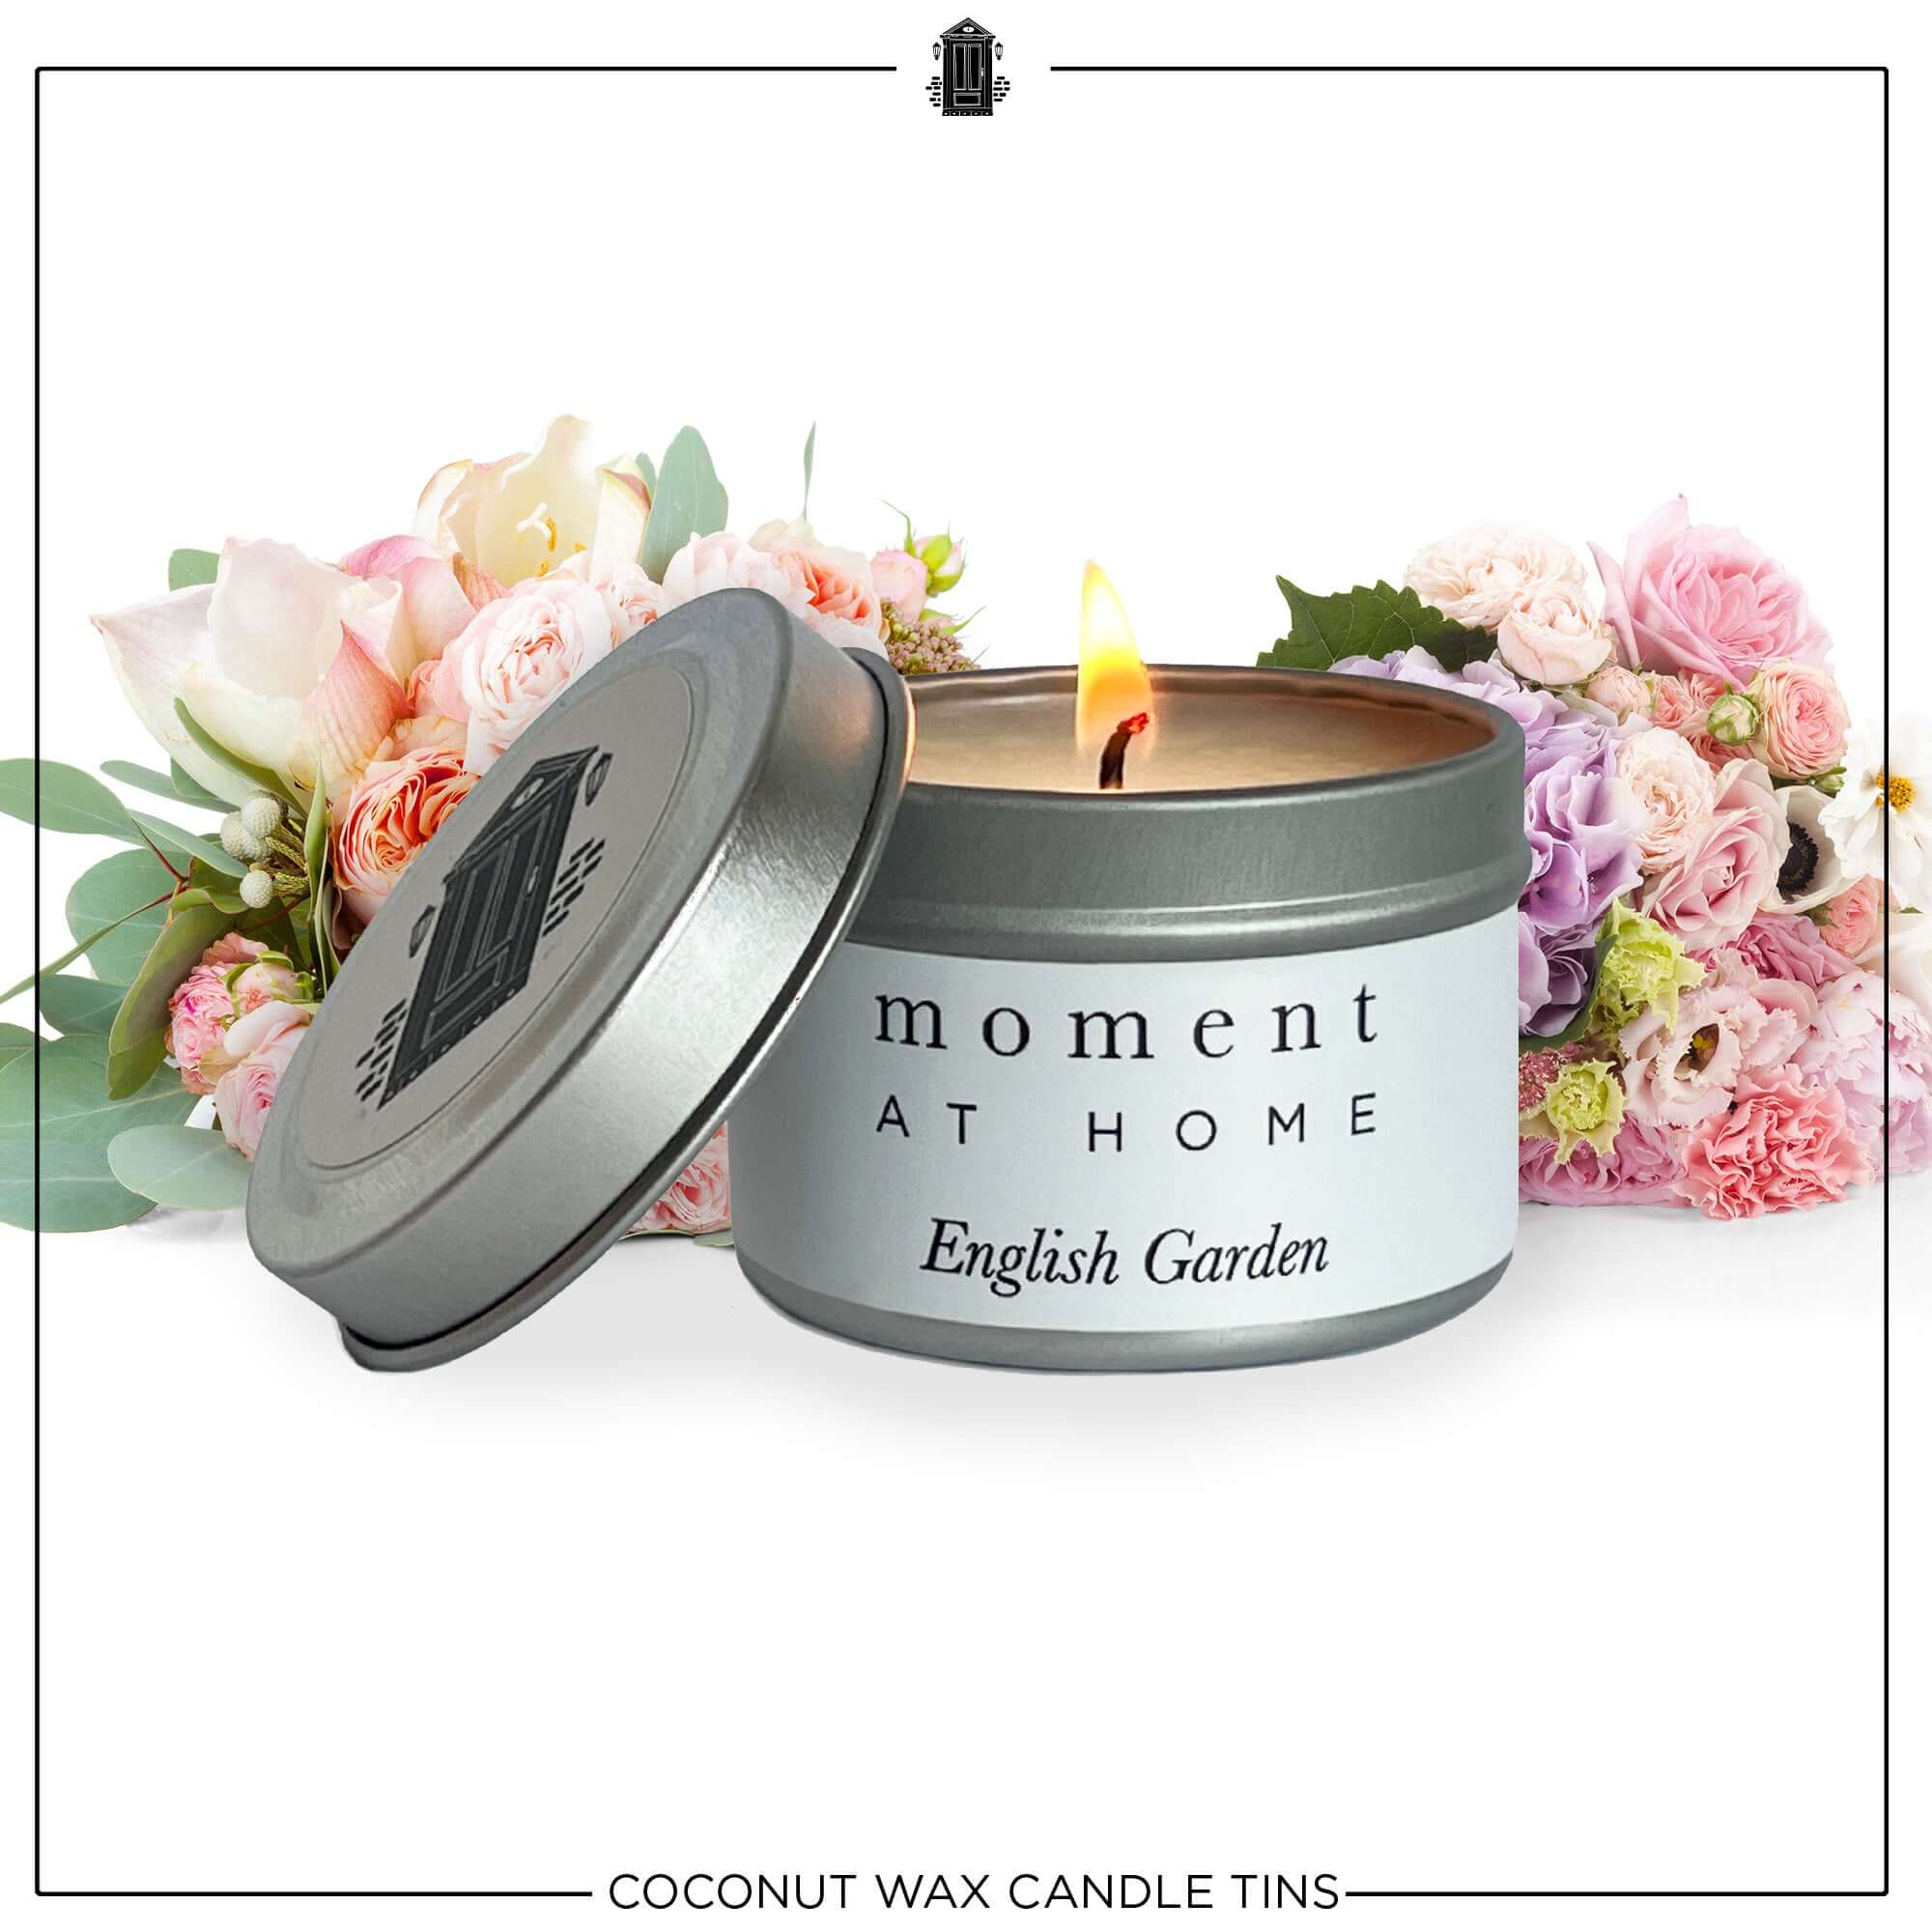 The English Garden Mini Travel Candle With Lilies, Rose & Jasmine Fragrance.